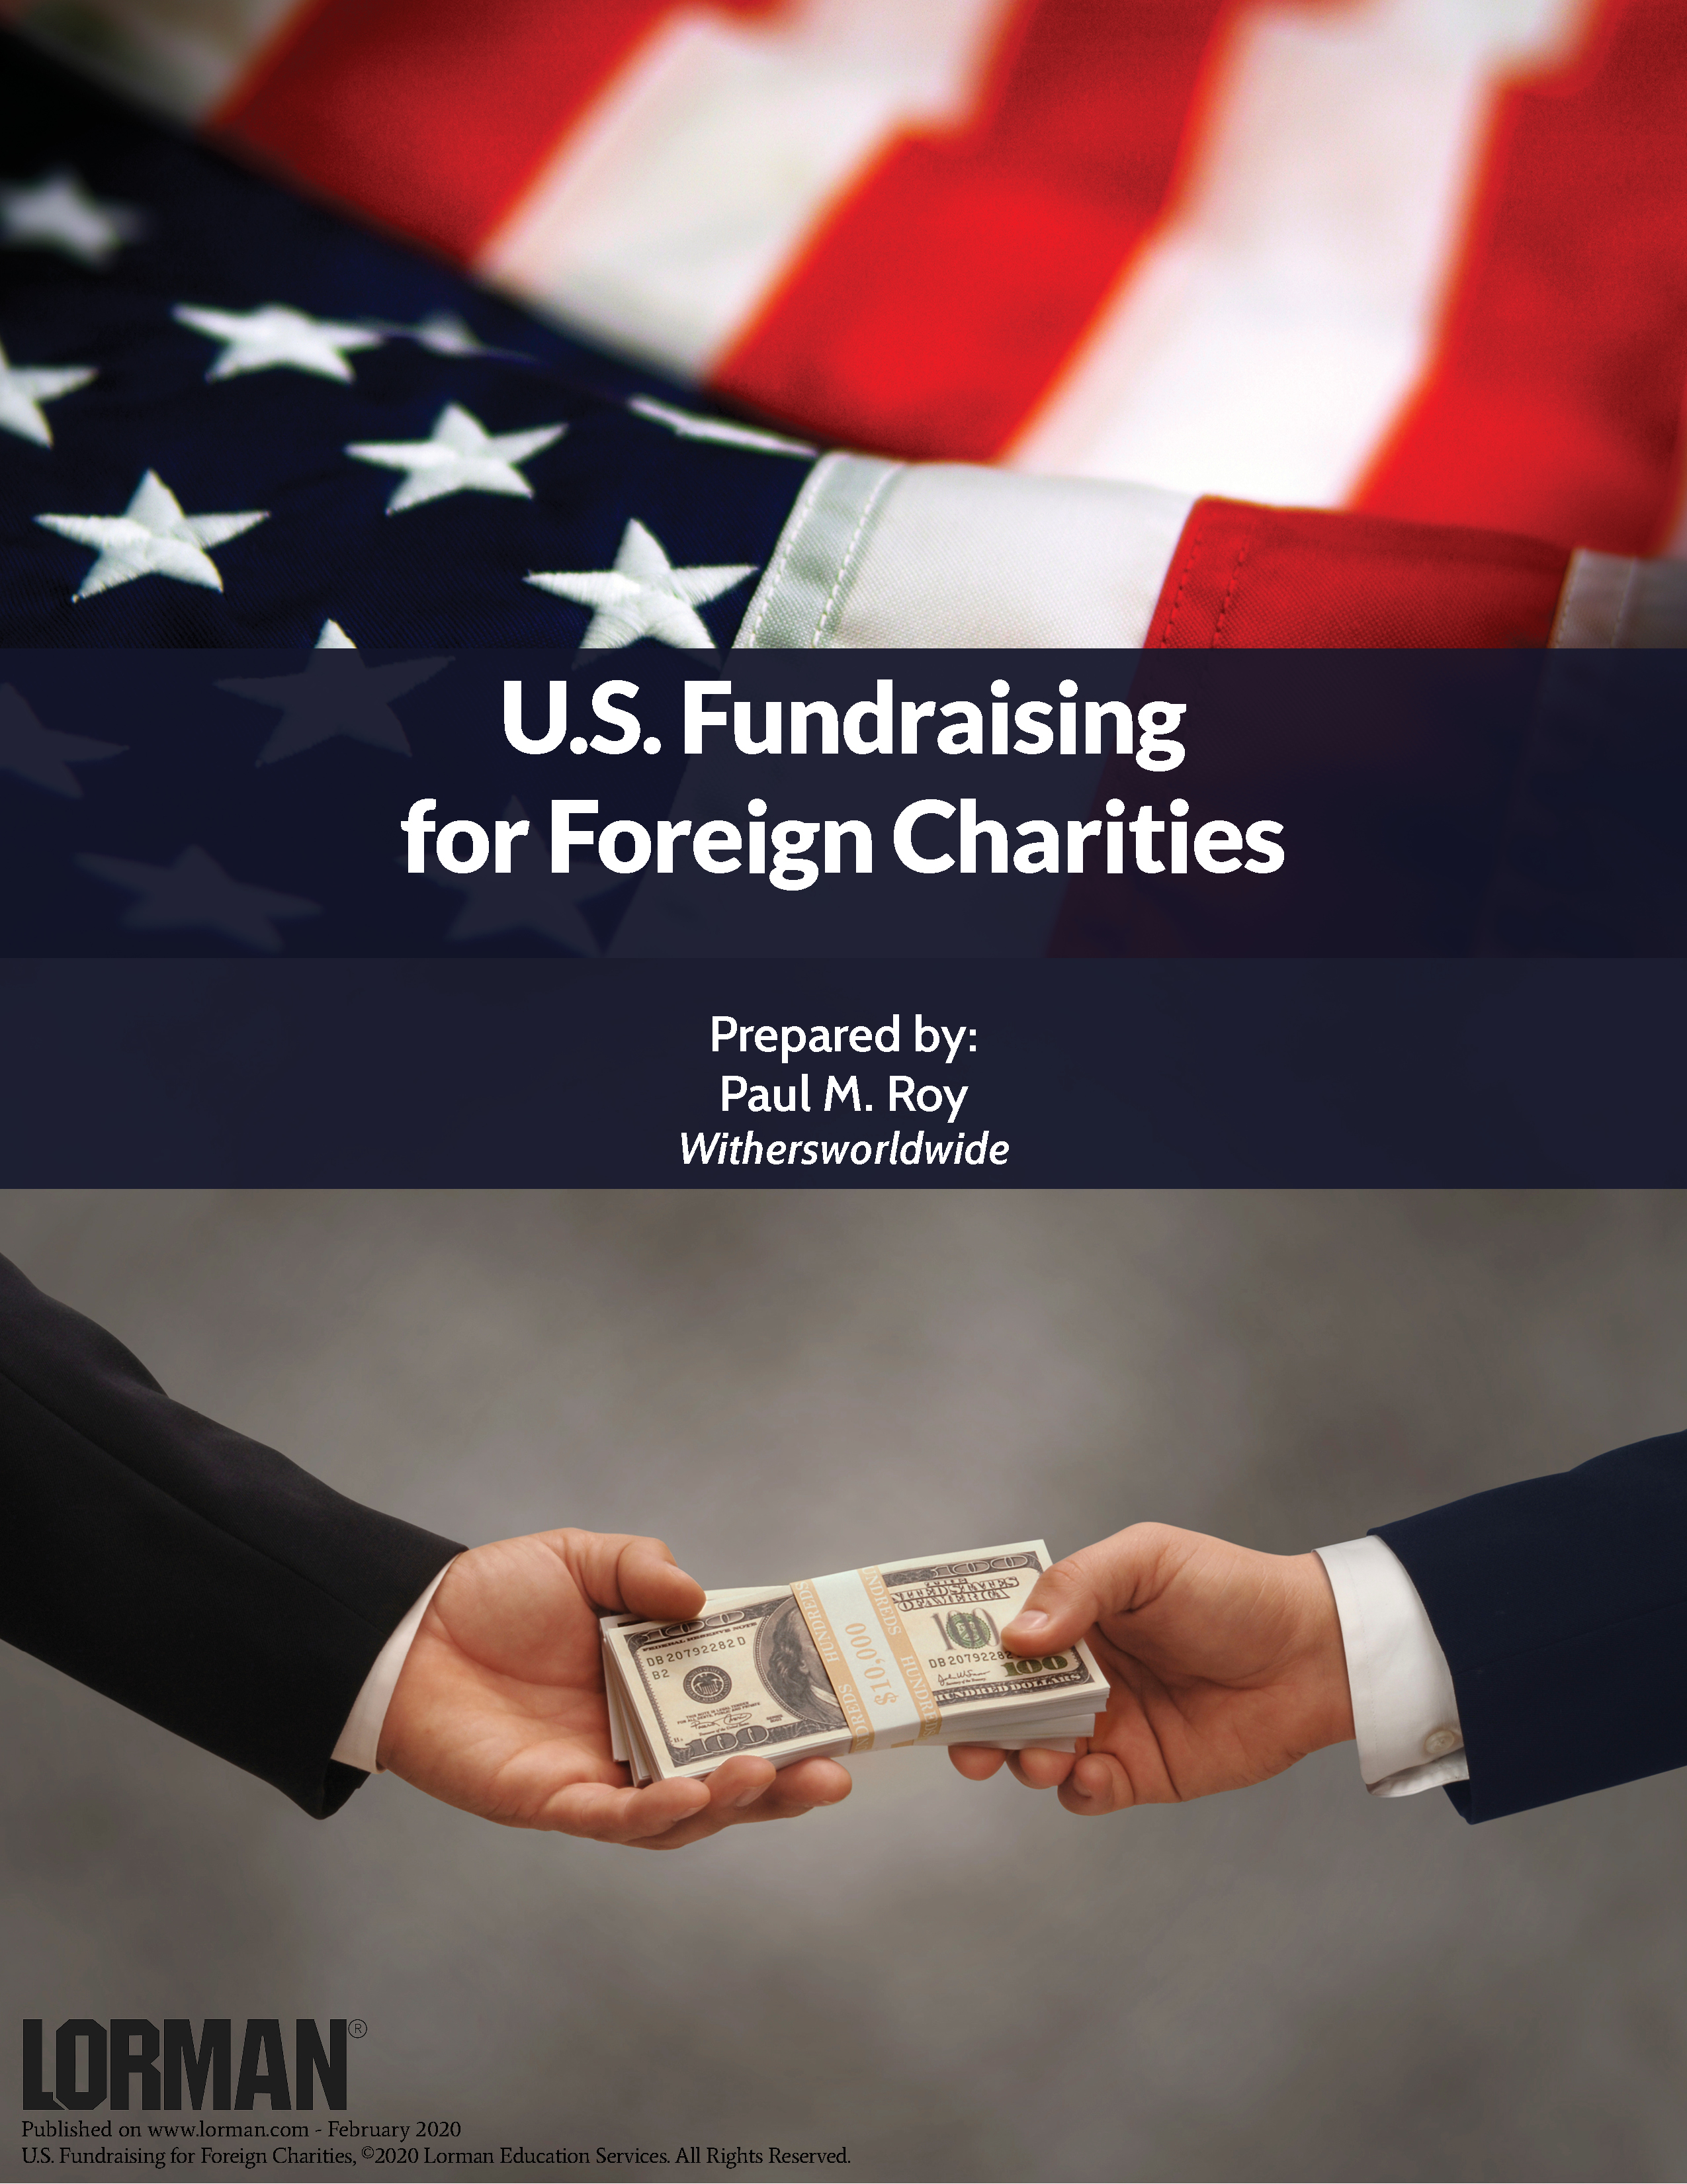 U.S. Fundraising for Foreign Charities